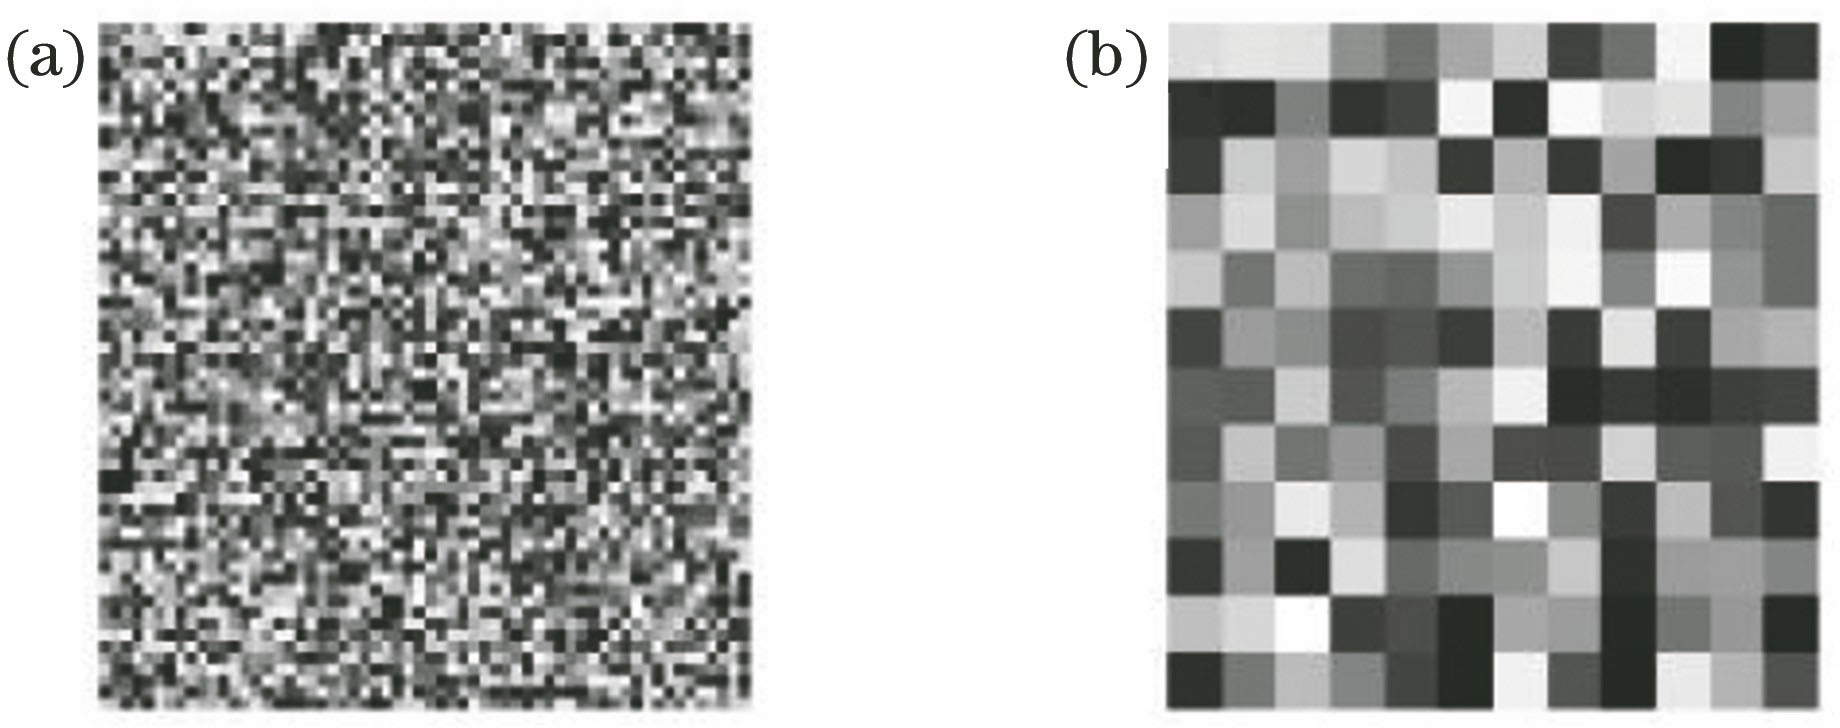 Speckle patterns of different speckle particle sizes. (a) Speckle particle size of 1 pixel×1 pixel; (b) speckle particle size of 5 pixel×5 pixel